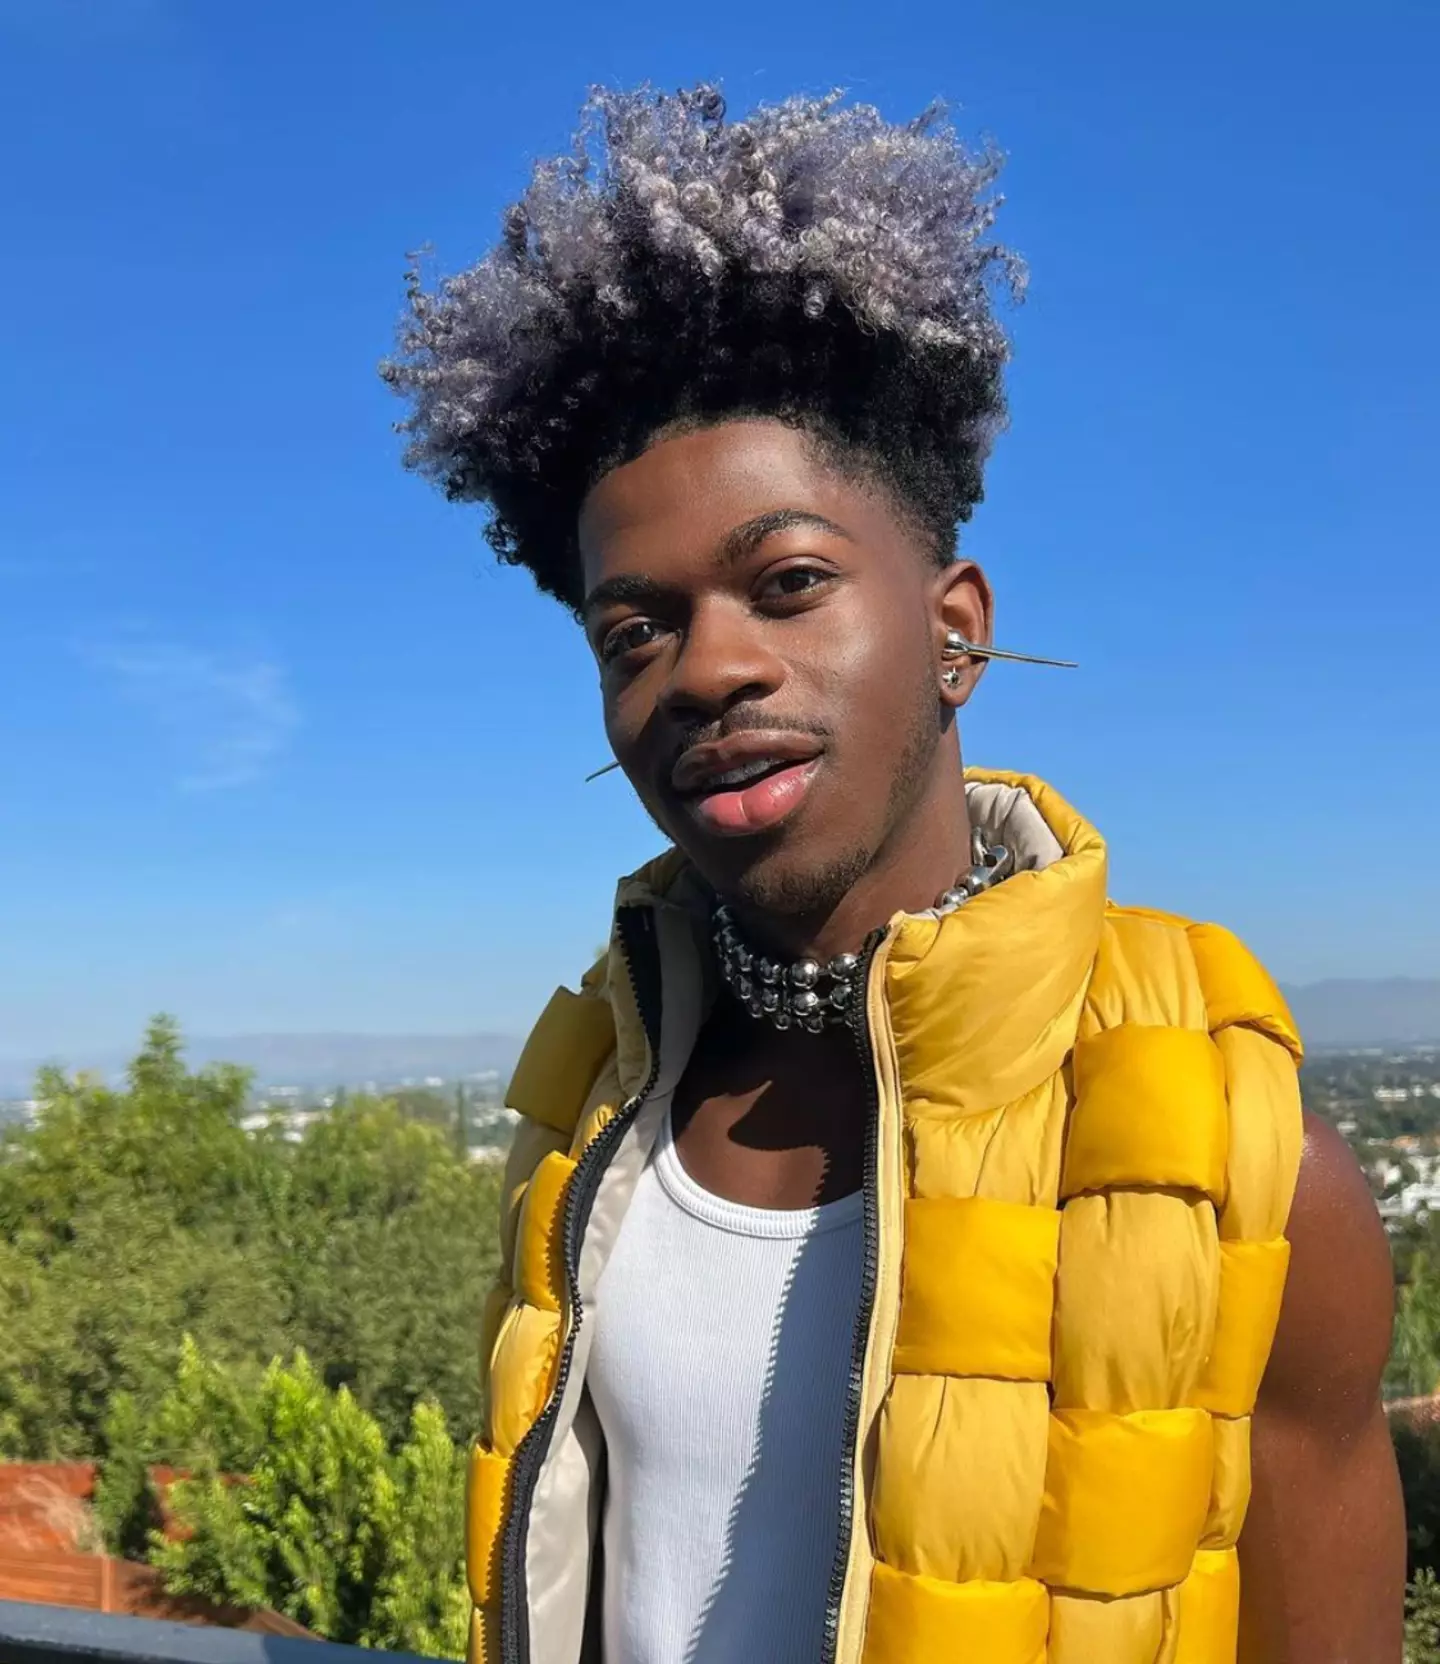 Lil Nas X has not yet responded to the backlash.